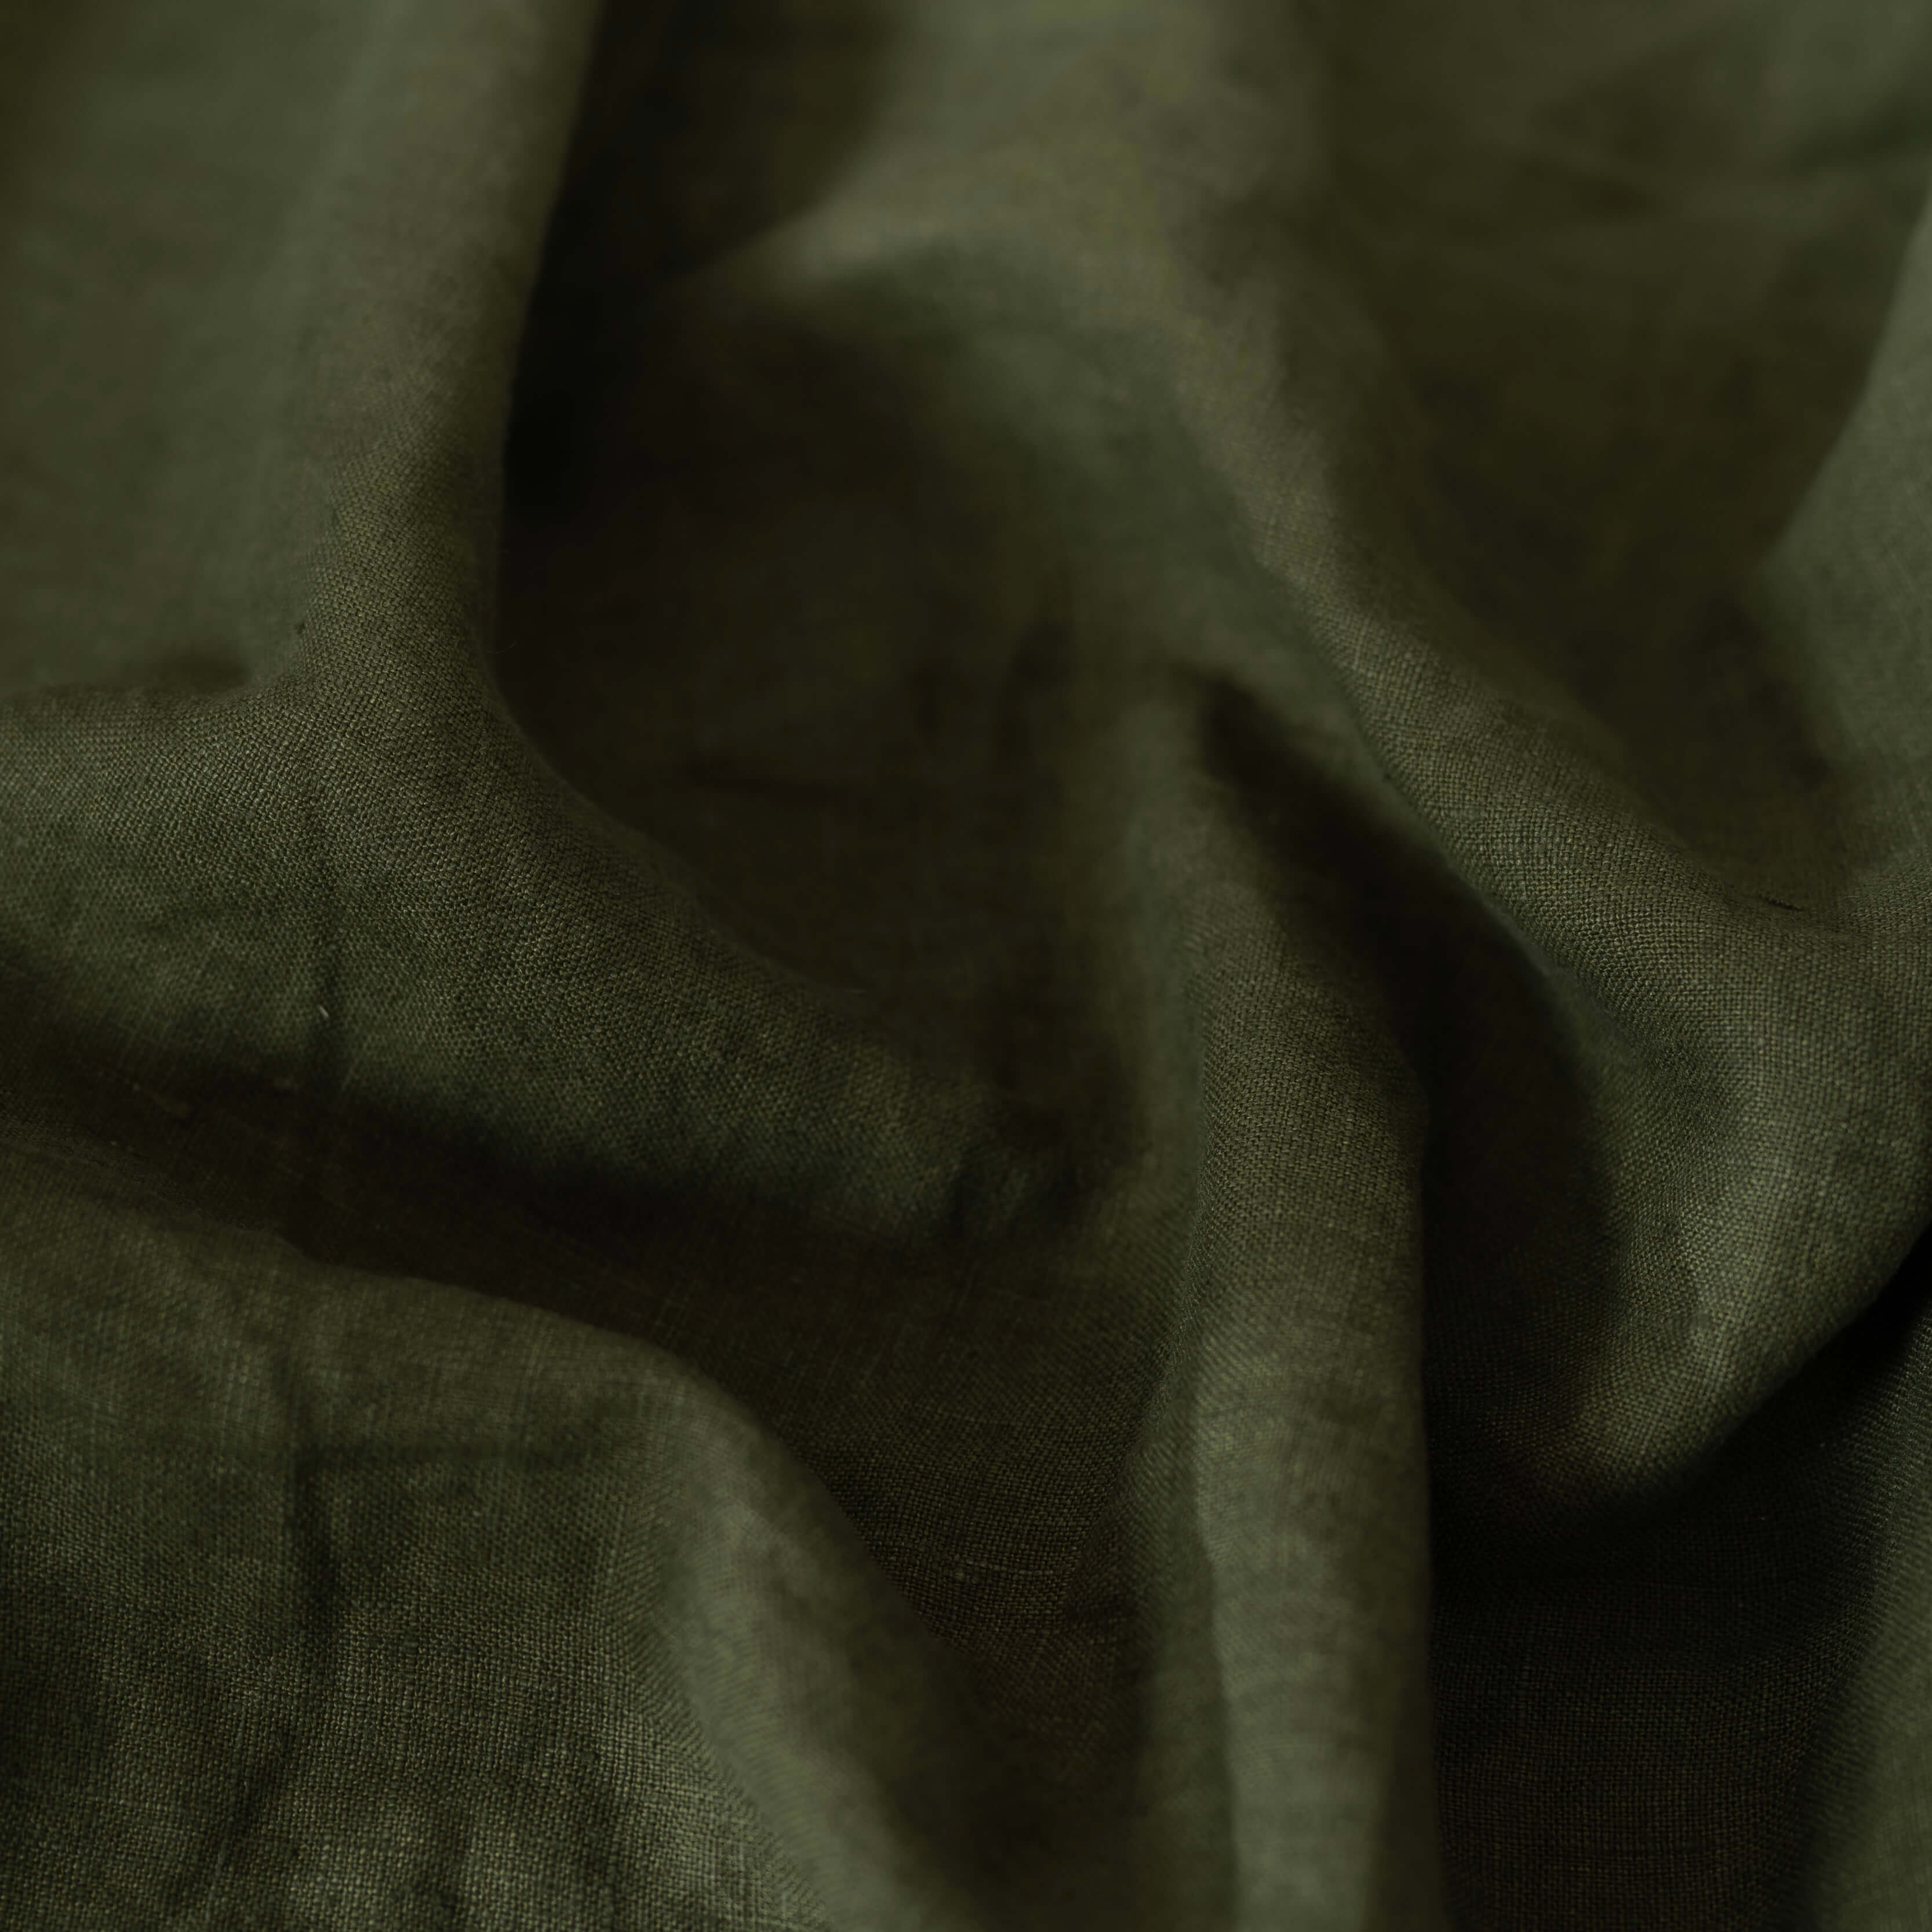 Avocado green linen fabric scrunched up